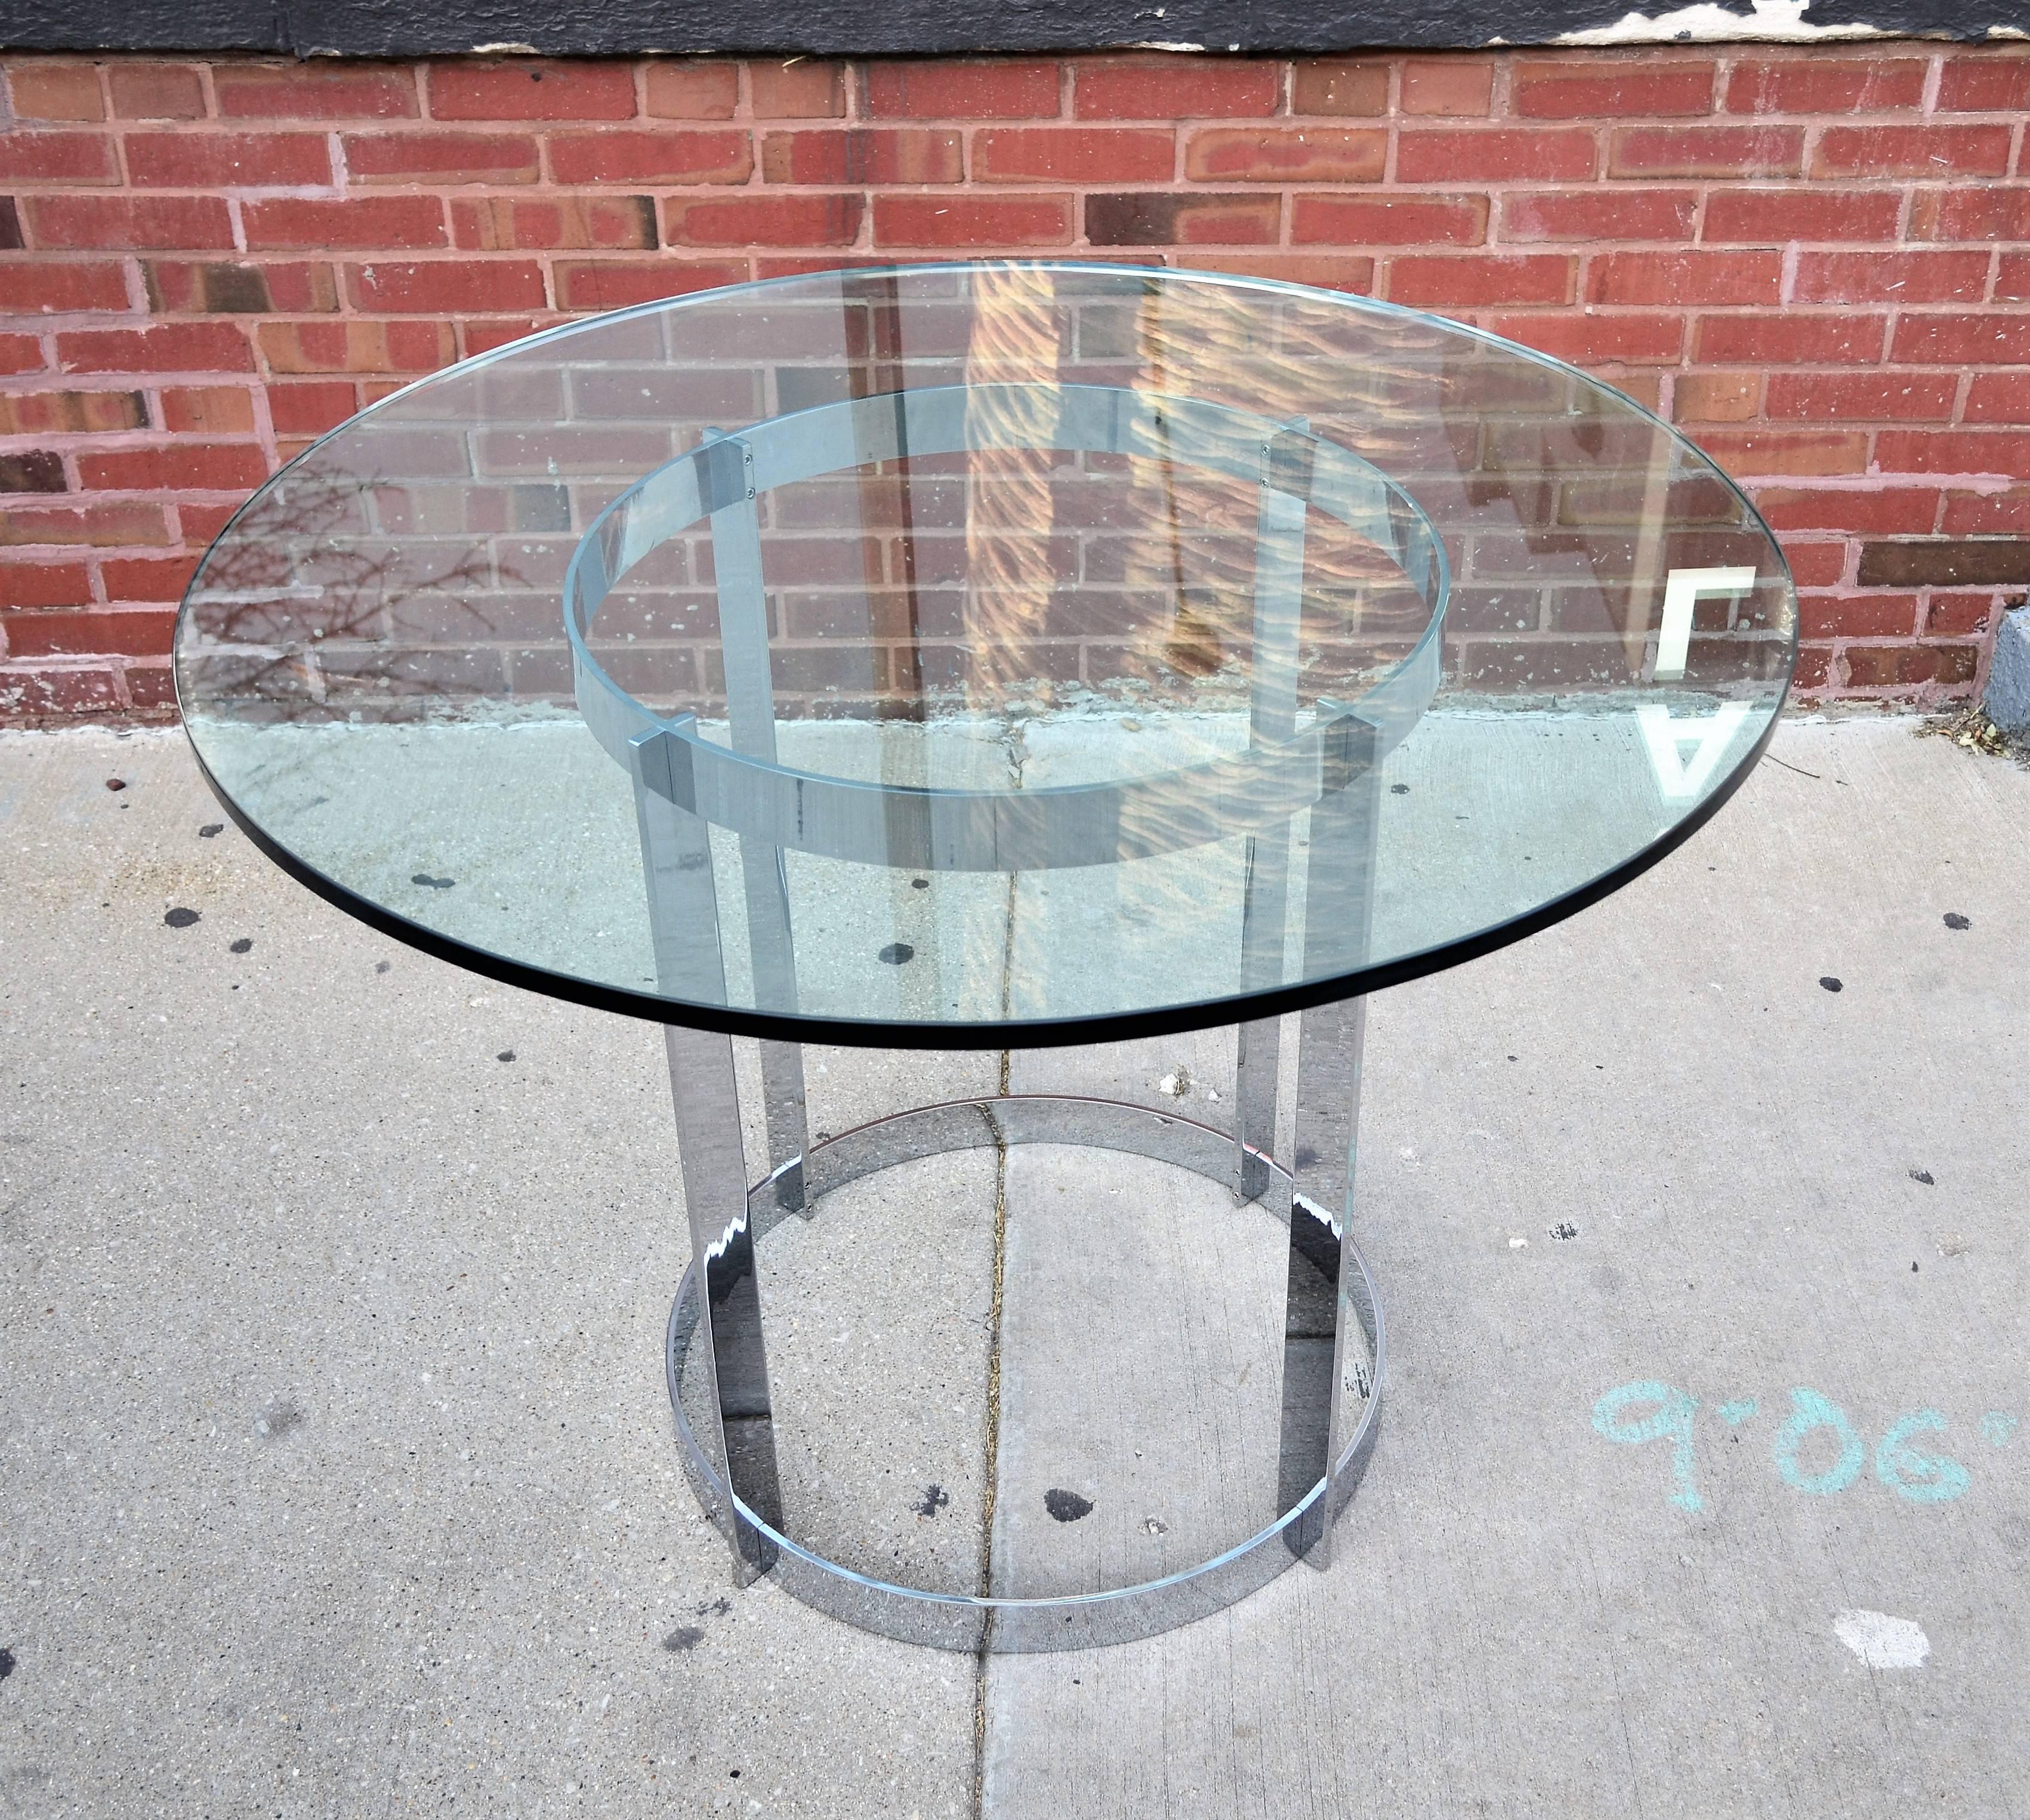 A well made heavy solid chrome by Tri-Mark round dining table with a thick glass top.
Its modern Minimalist design and versatile size lends itself to multiple uses.
Side or end table, center table or even a games table. 
